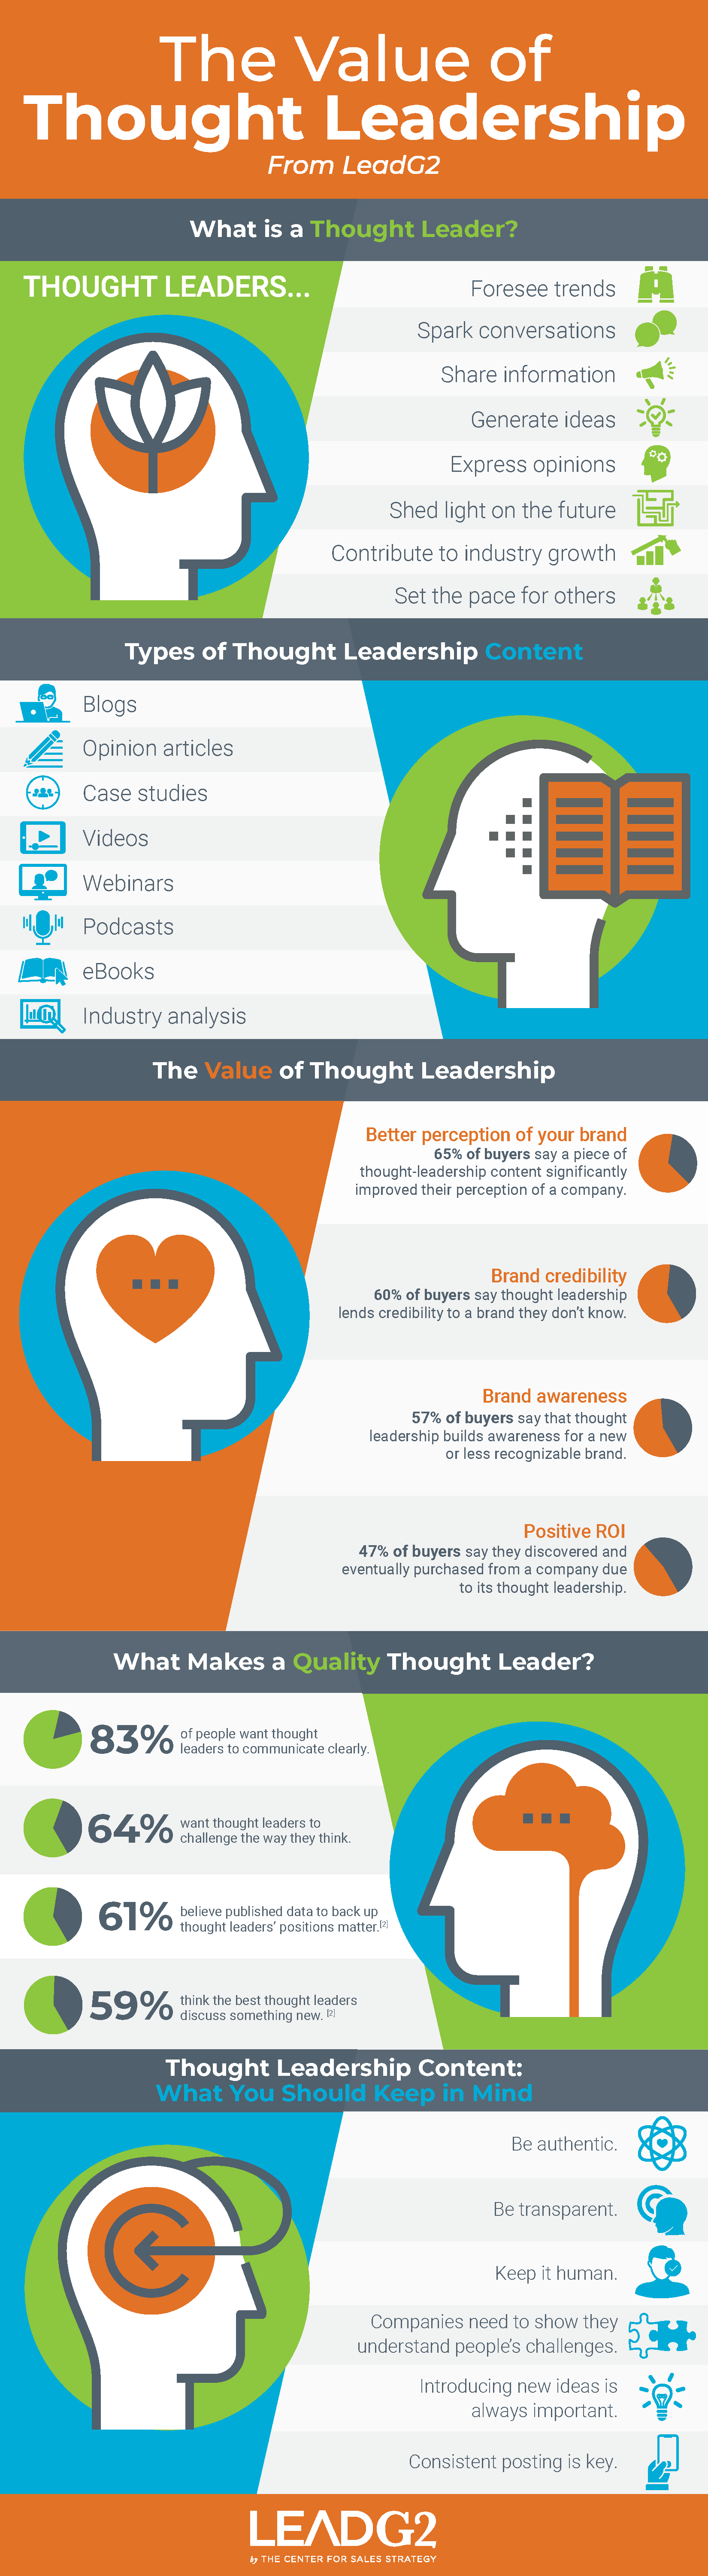 LG2_Infographic-Thought Leadership_FINAL USE1